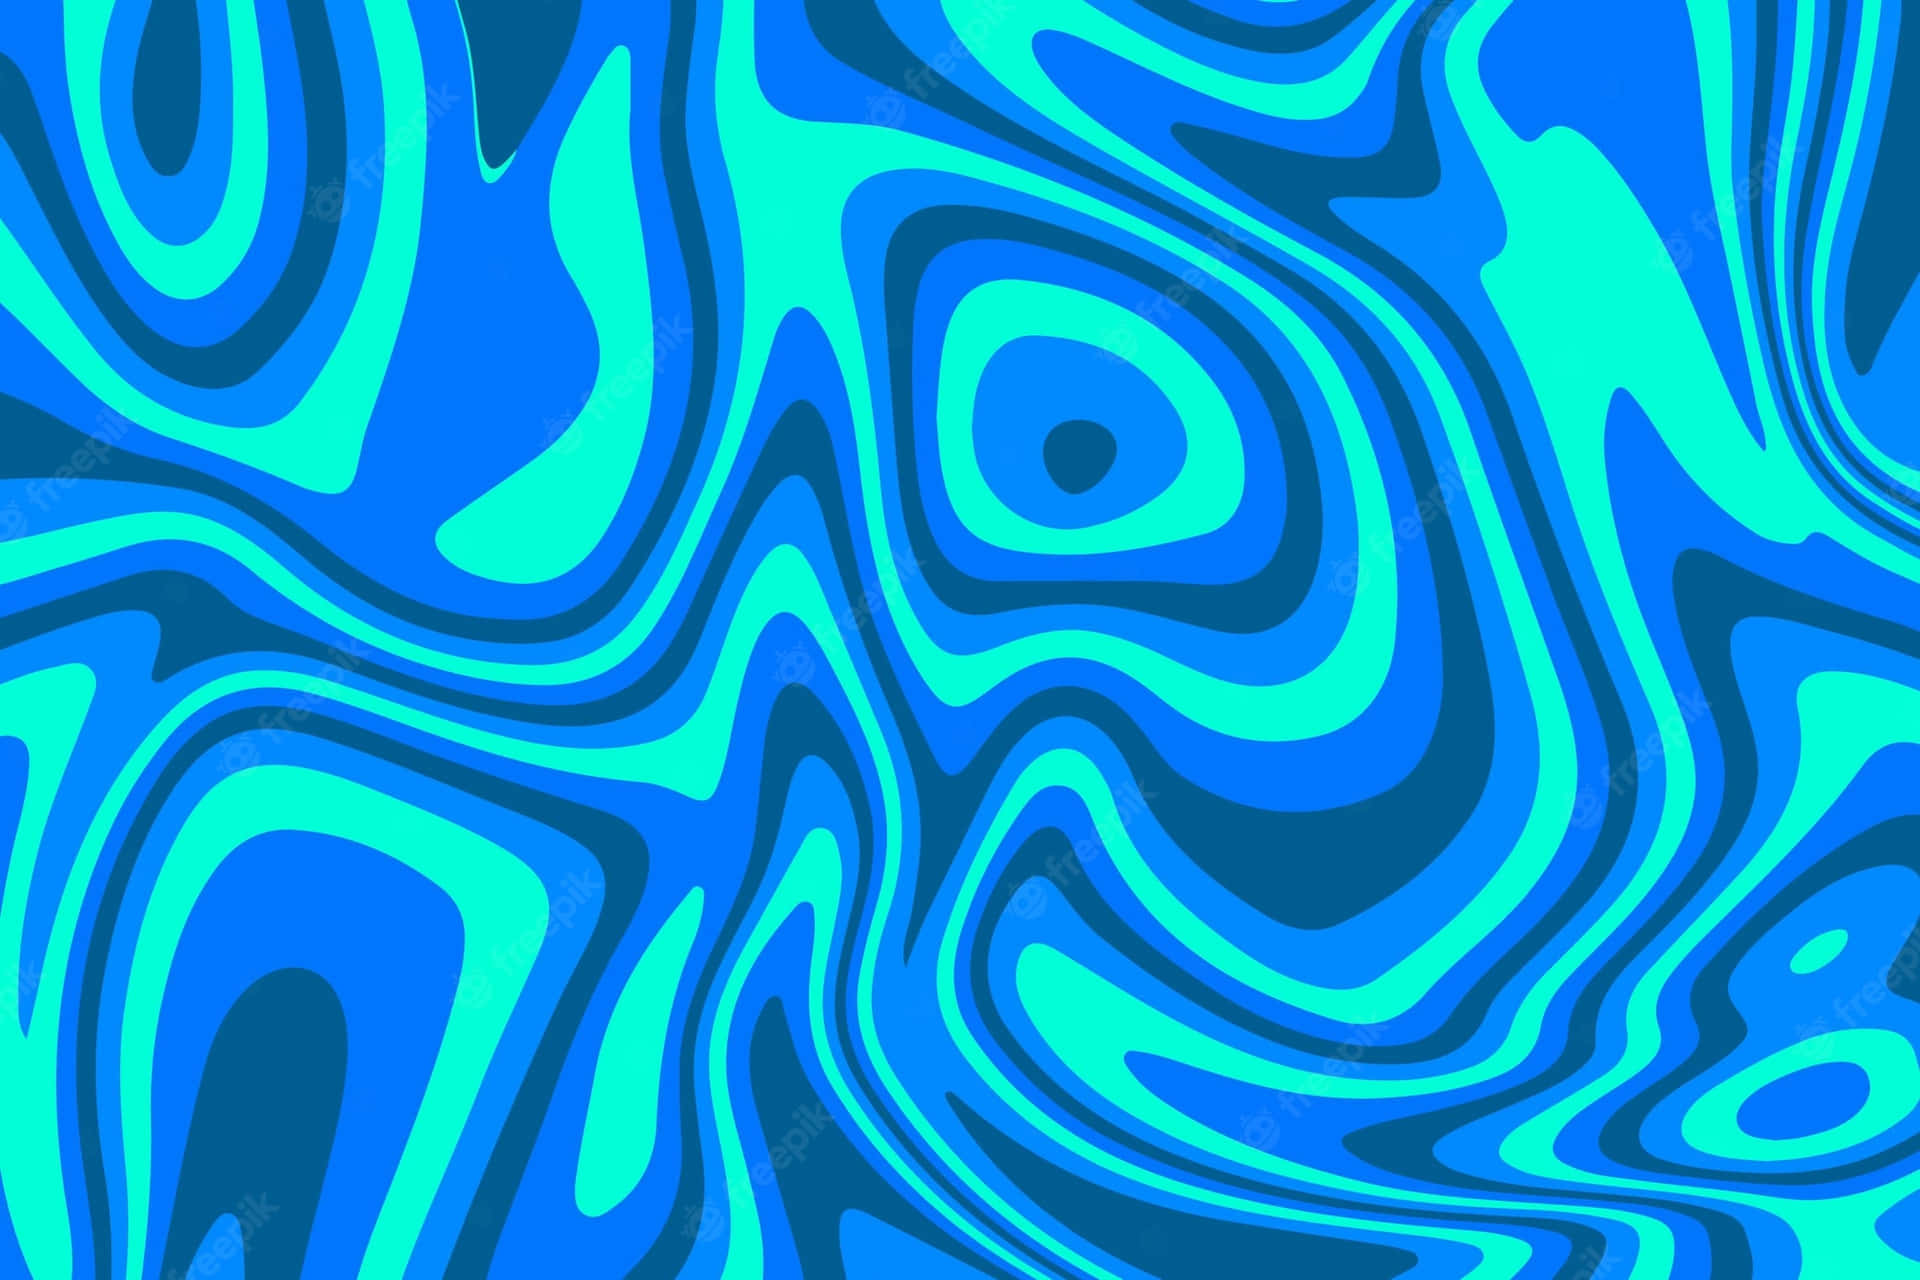 "Explore the realm of Trippy Blue in this mysterious and vibrant wallpaper." Wallpaper